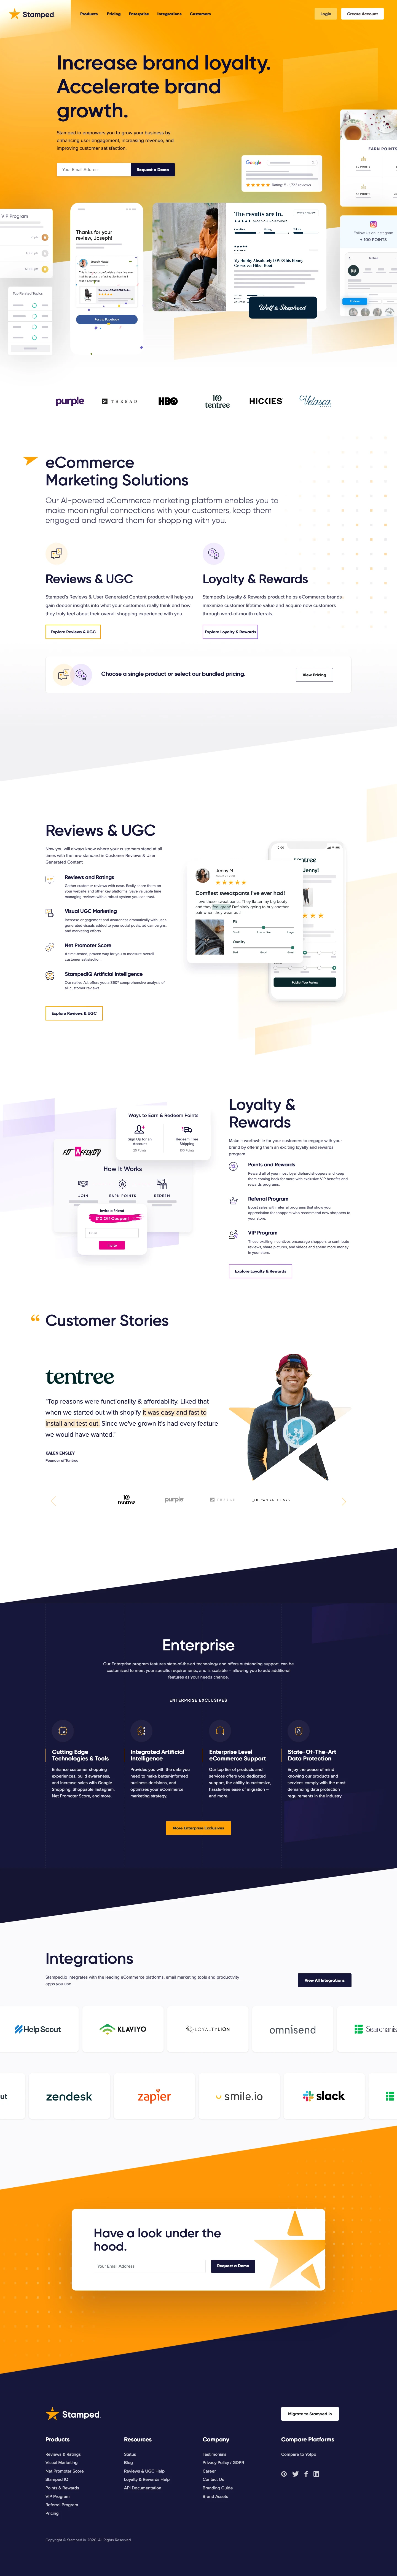 Stamped.io Landing Page Example: Stamped.io empowers you to grow your business by enhancing user engagement, increasing revenue, and improving customer satisfaction.